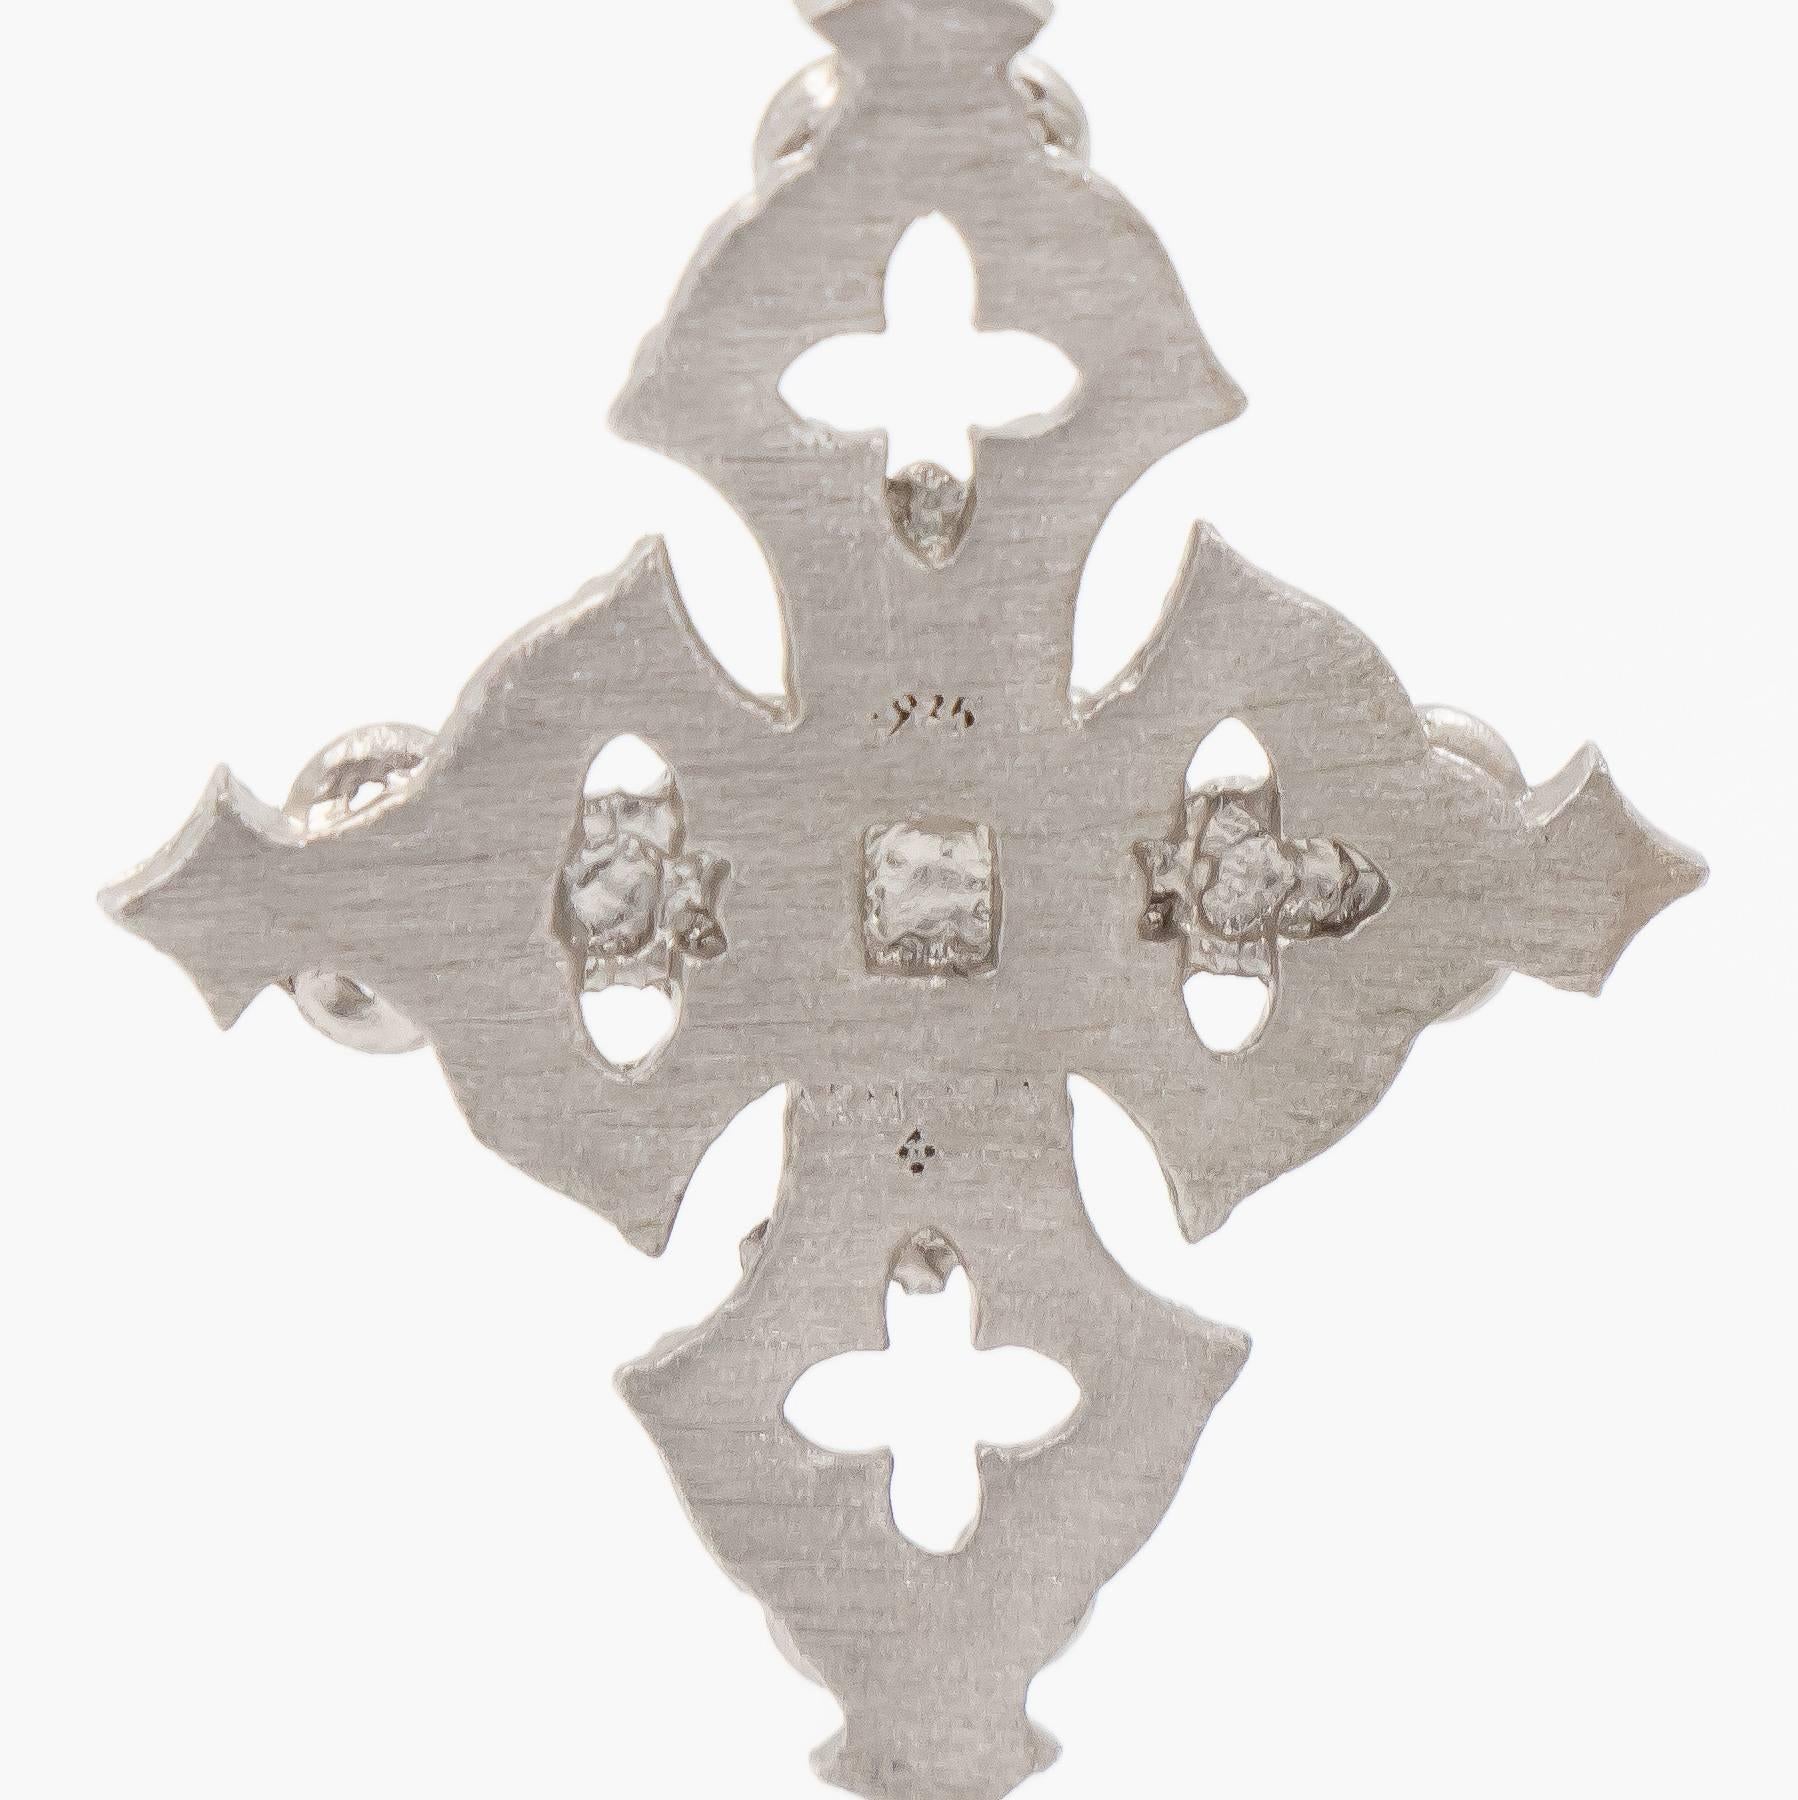 Renaissance Revival Armenta New World Cross Drop Earrings, Sterling Silver and Diamonds, Style 02899